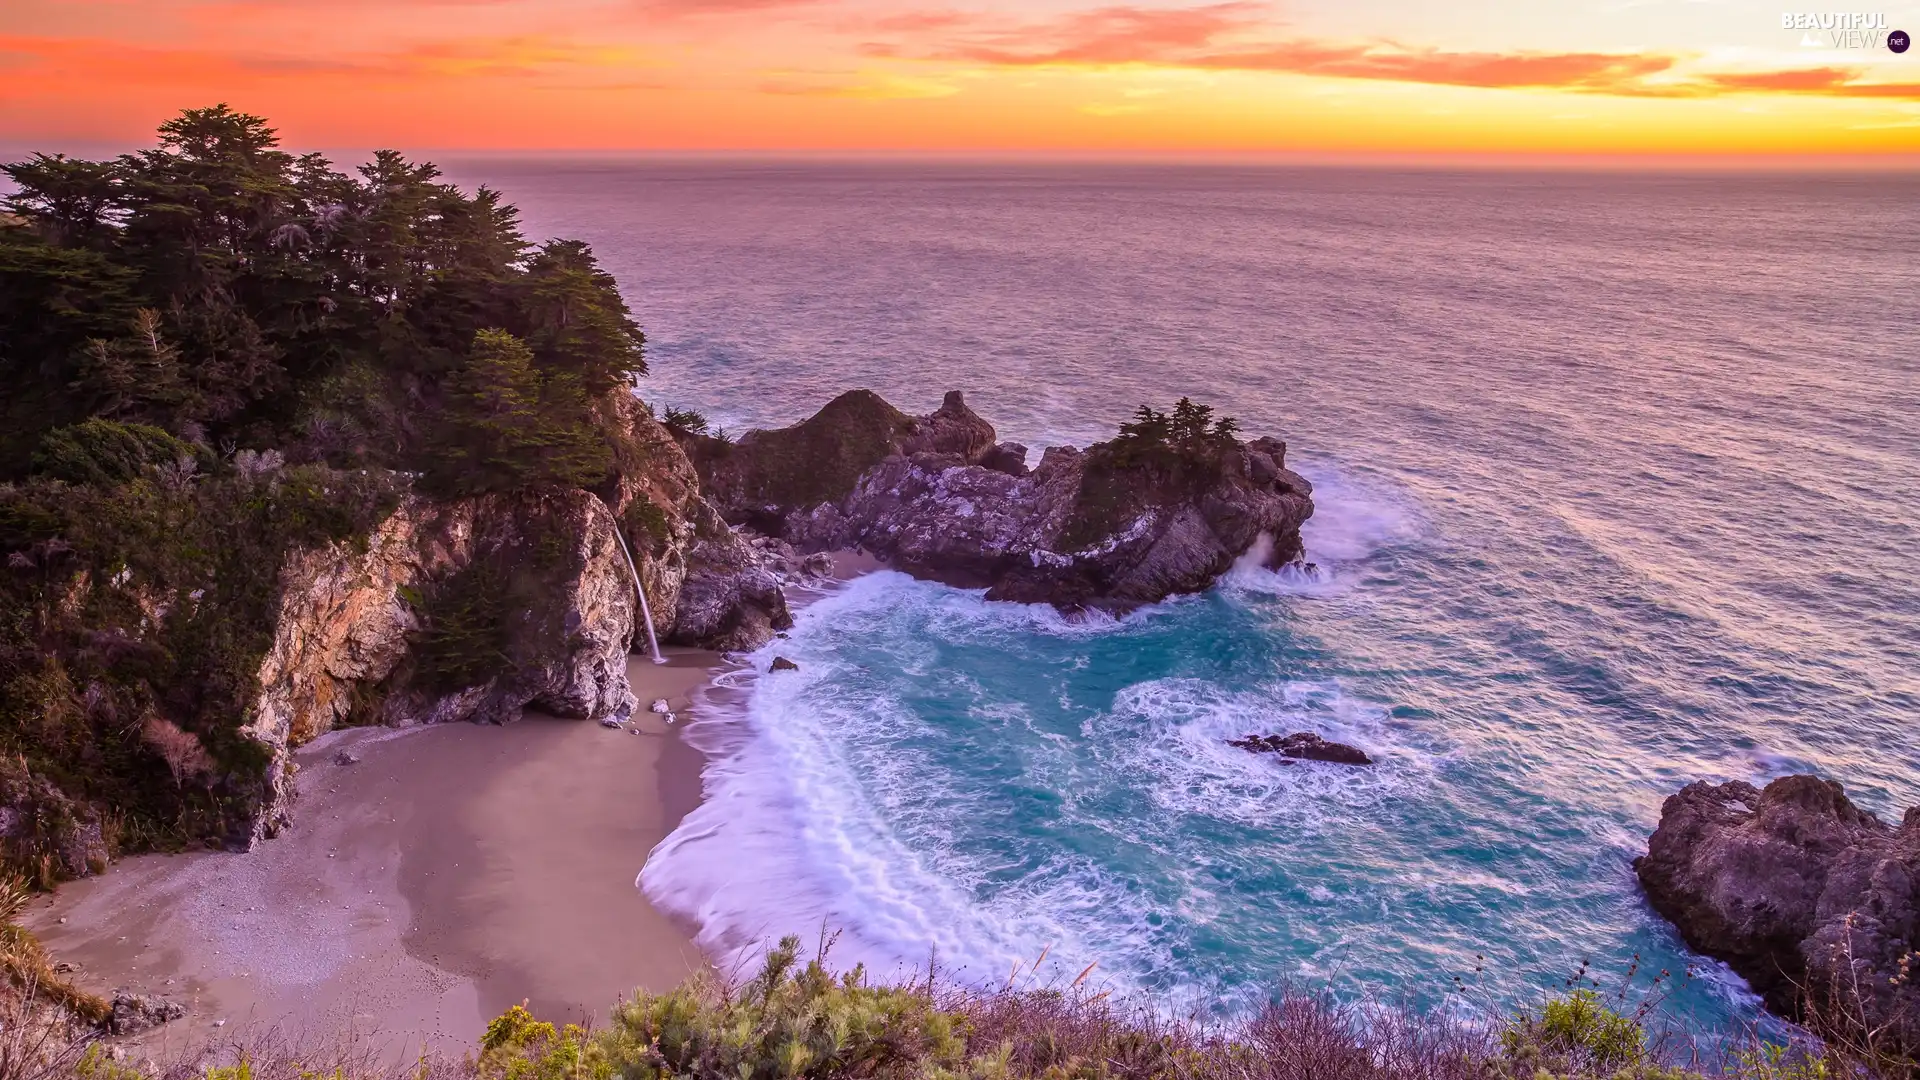 VEGETATION, viewes, Great Sunsets, Coast, sea, California, trees, Julia Pfeiffer Burns State Park, The United States, rocks, McWay Falls, McWay Cove